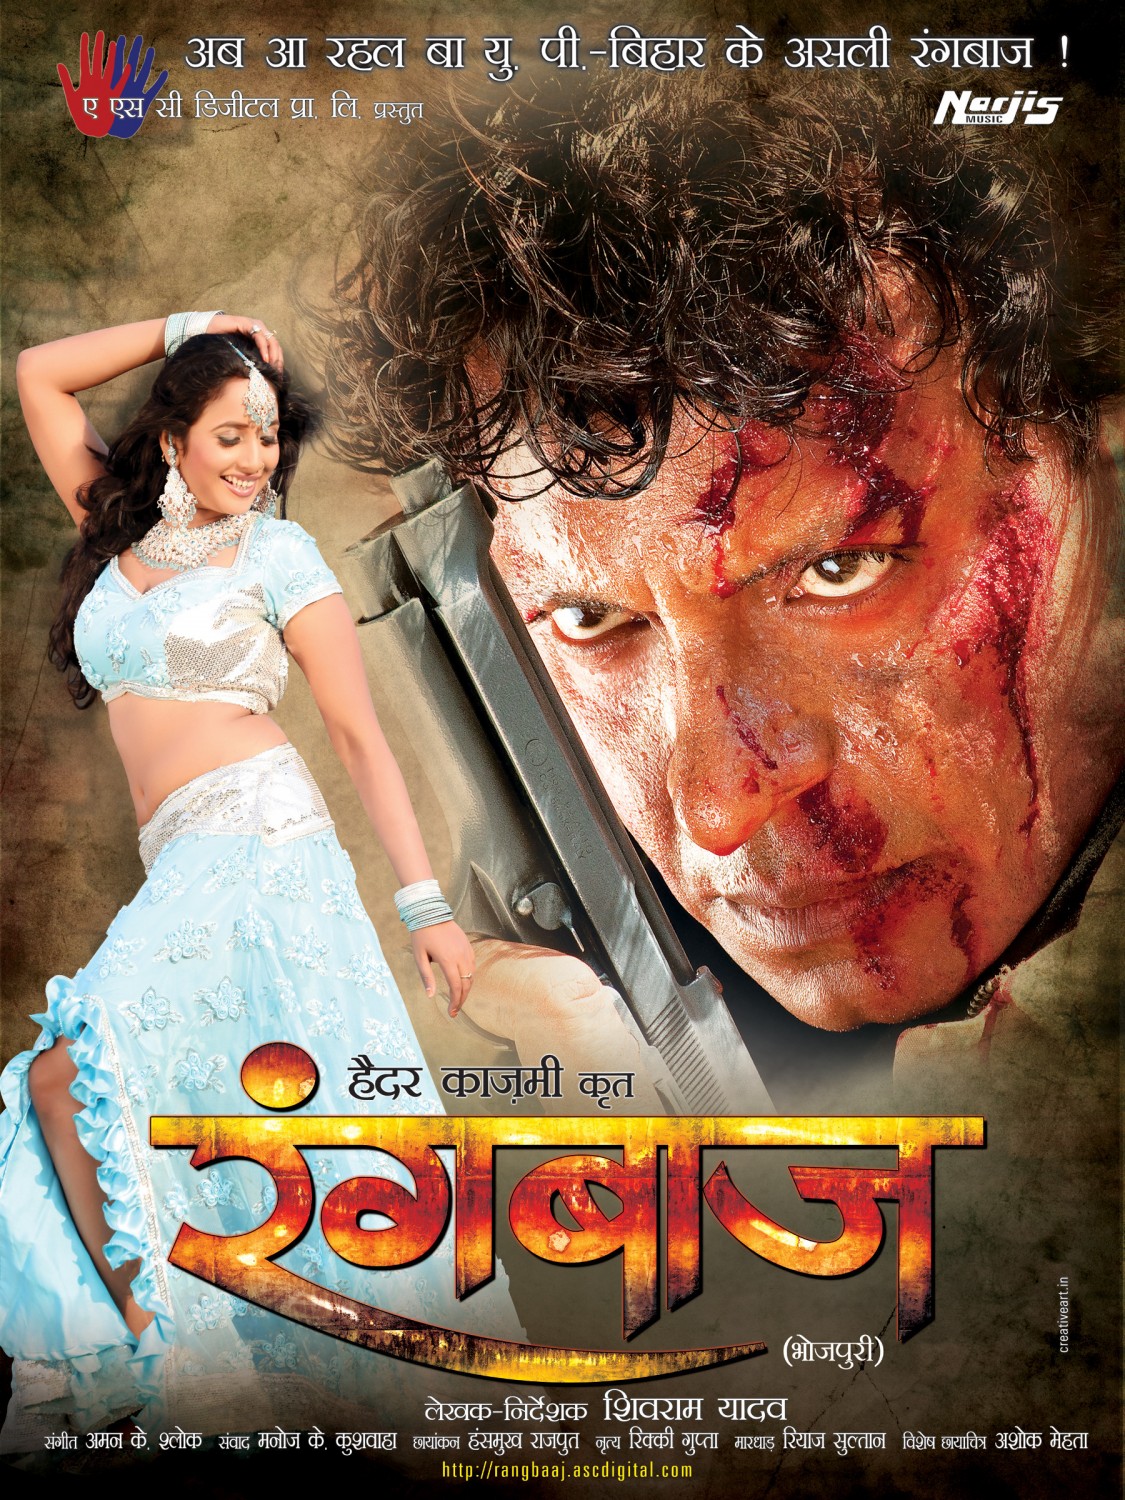 Extra Large Movie Poster Image for Rangbaaj (#1 of 2)